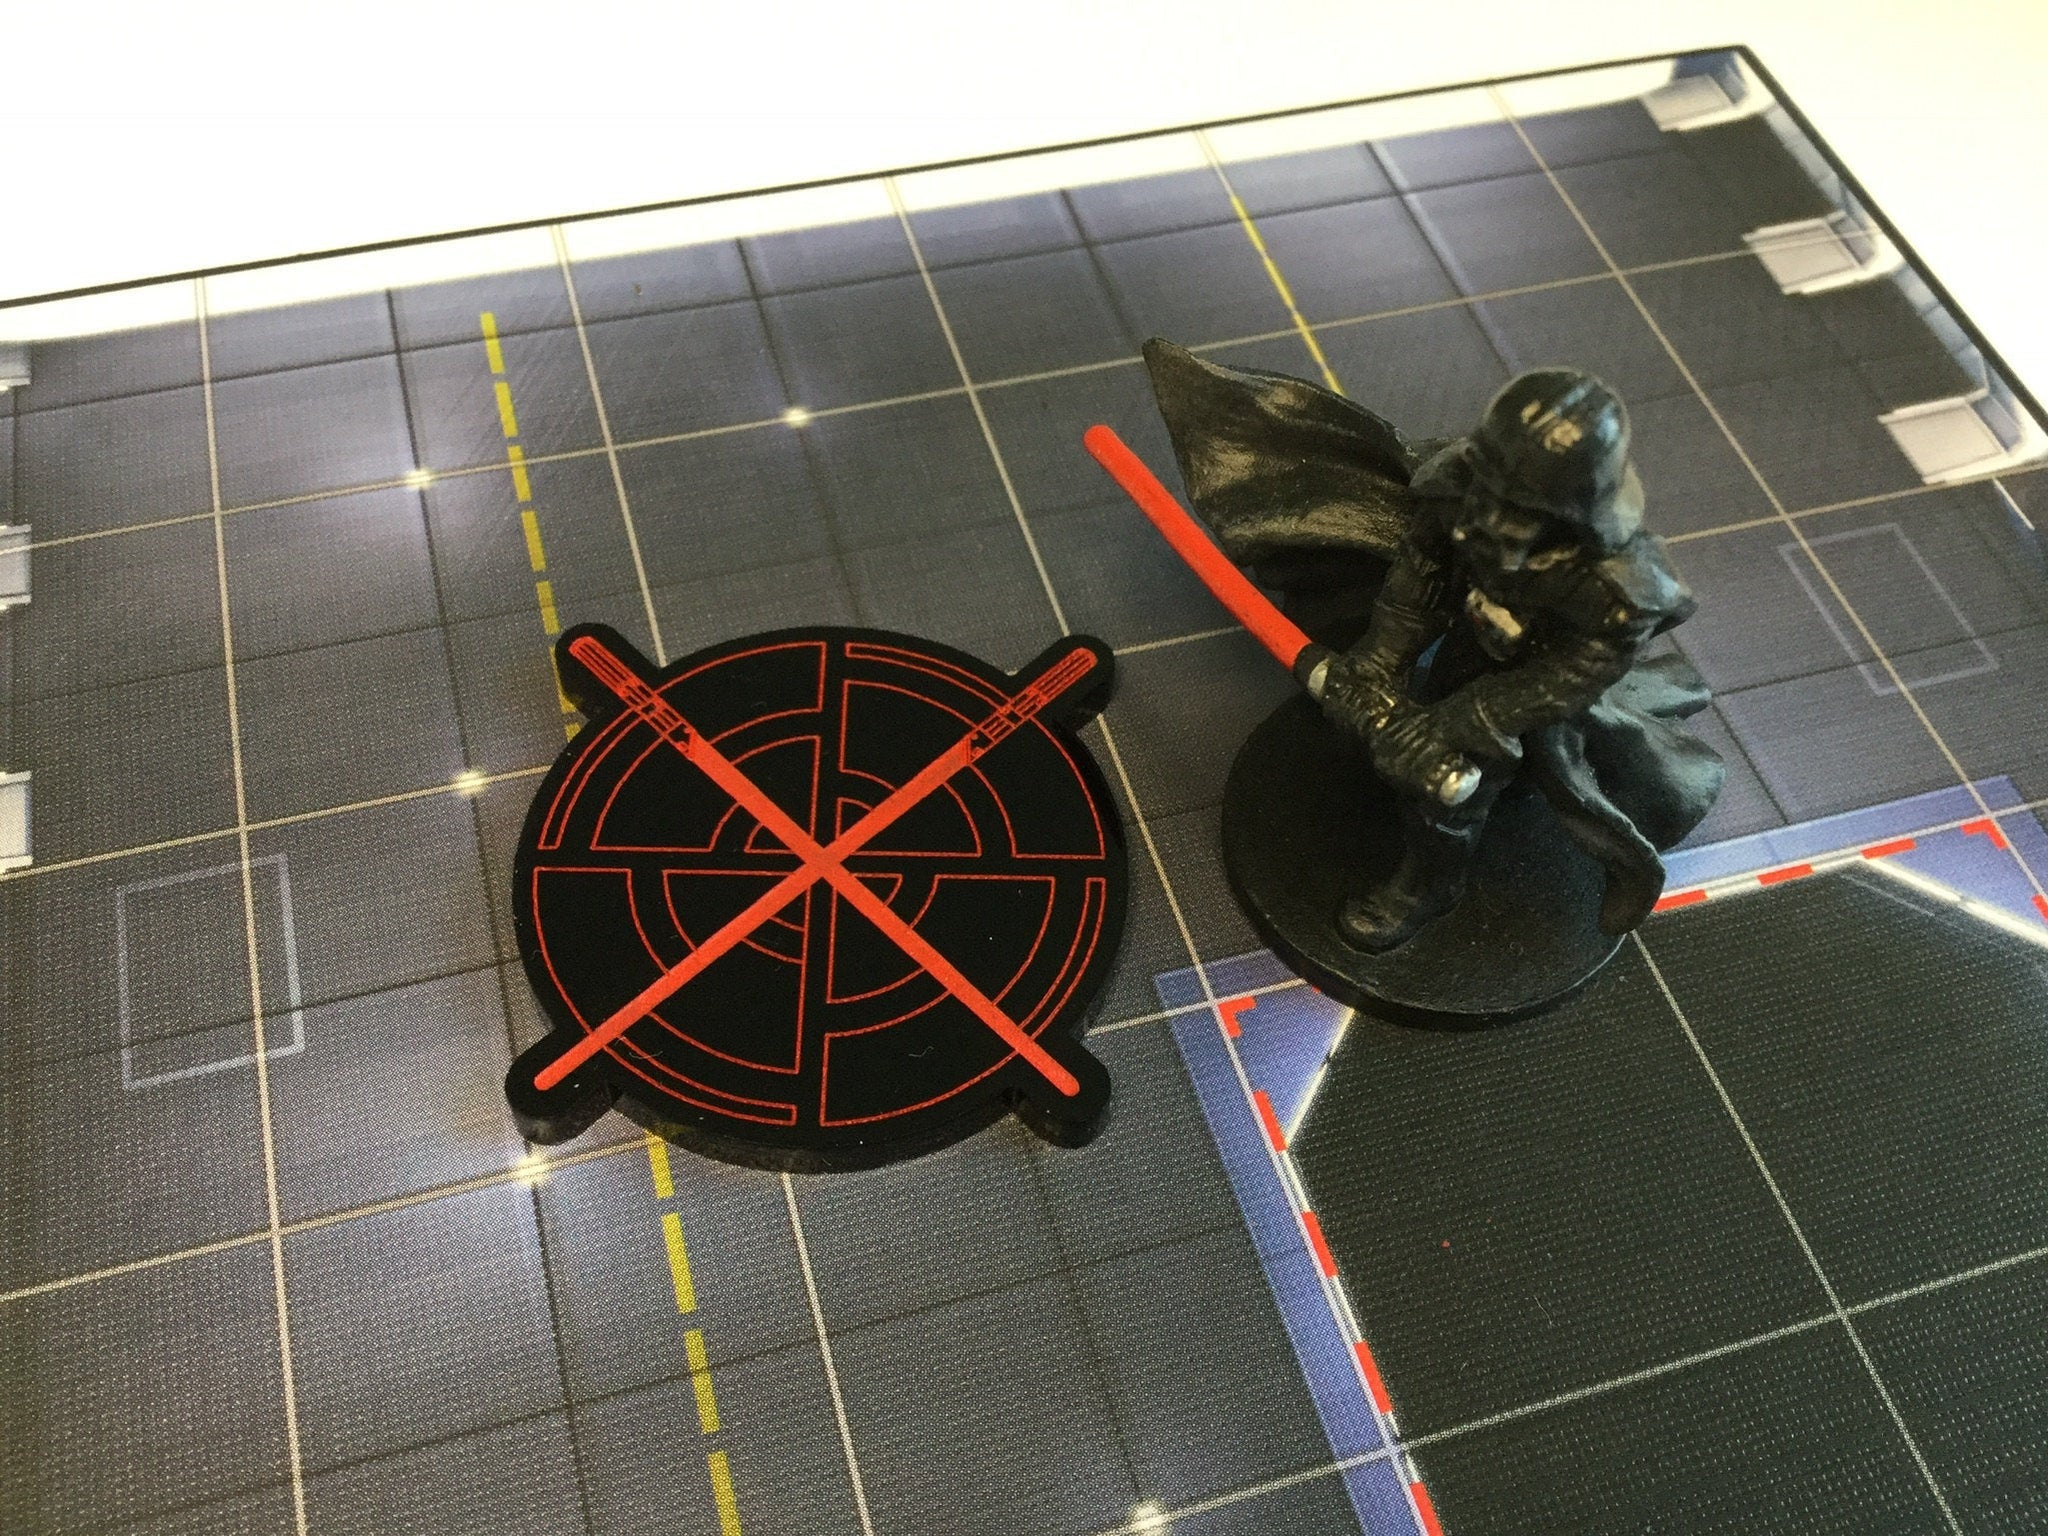 Imperial Assault compatible, acrylic Initiative token